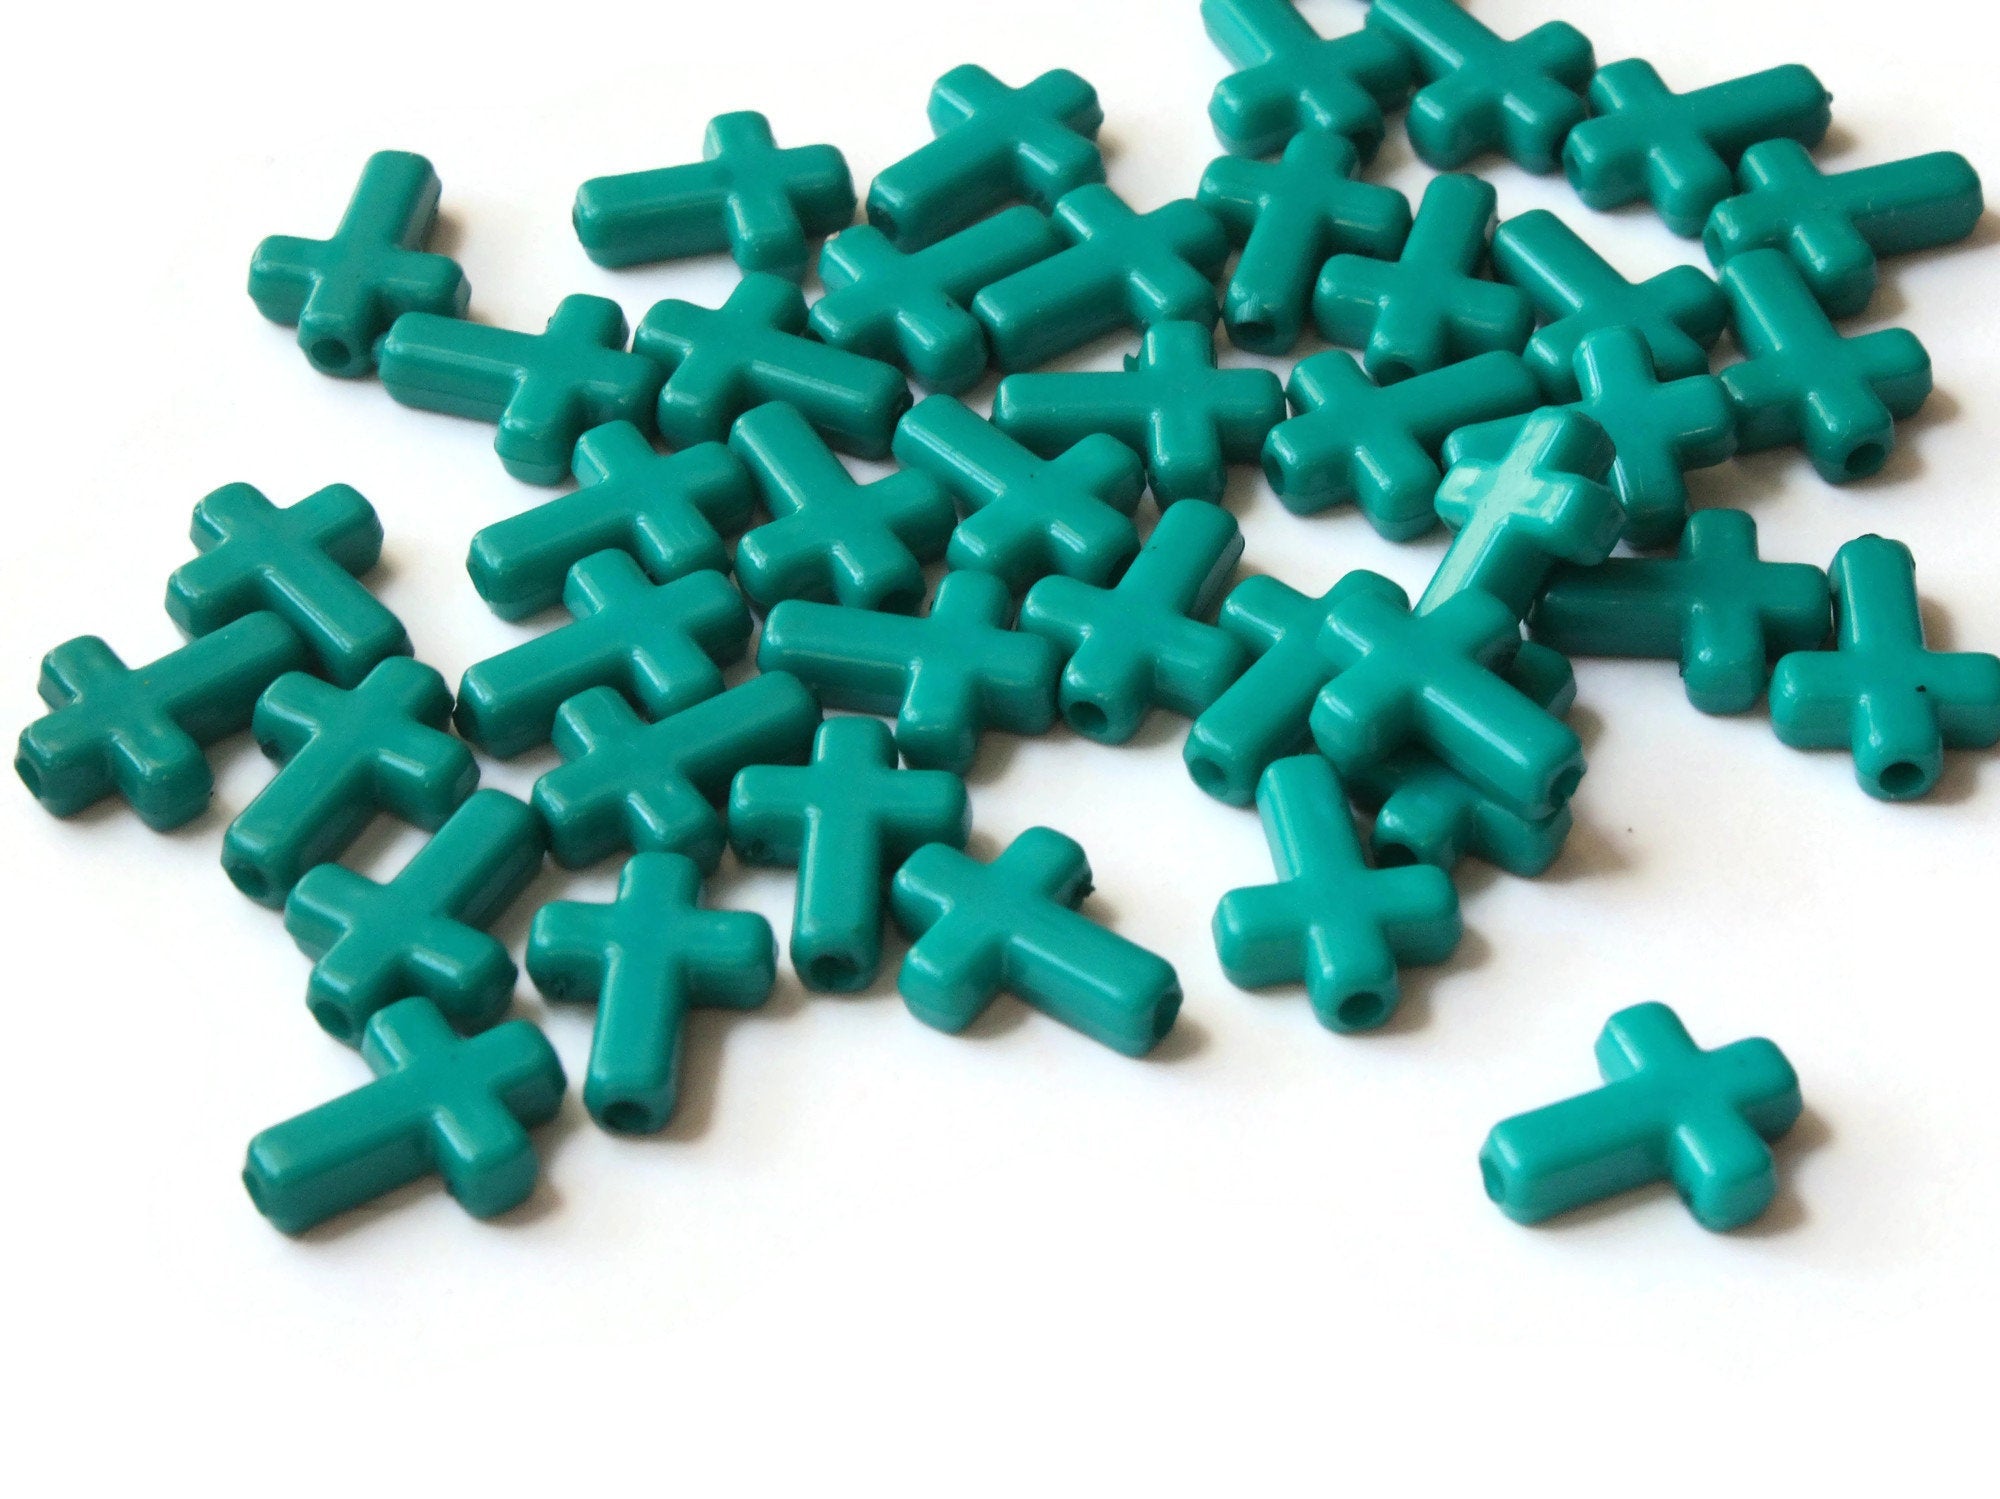 50 16mm Blue Plastic Cross Beads Christian Beads by Smileyboy | Michaels